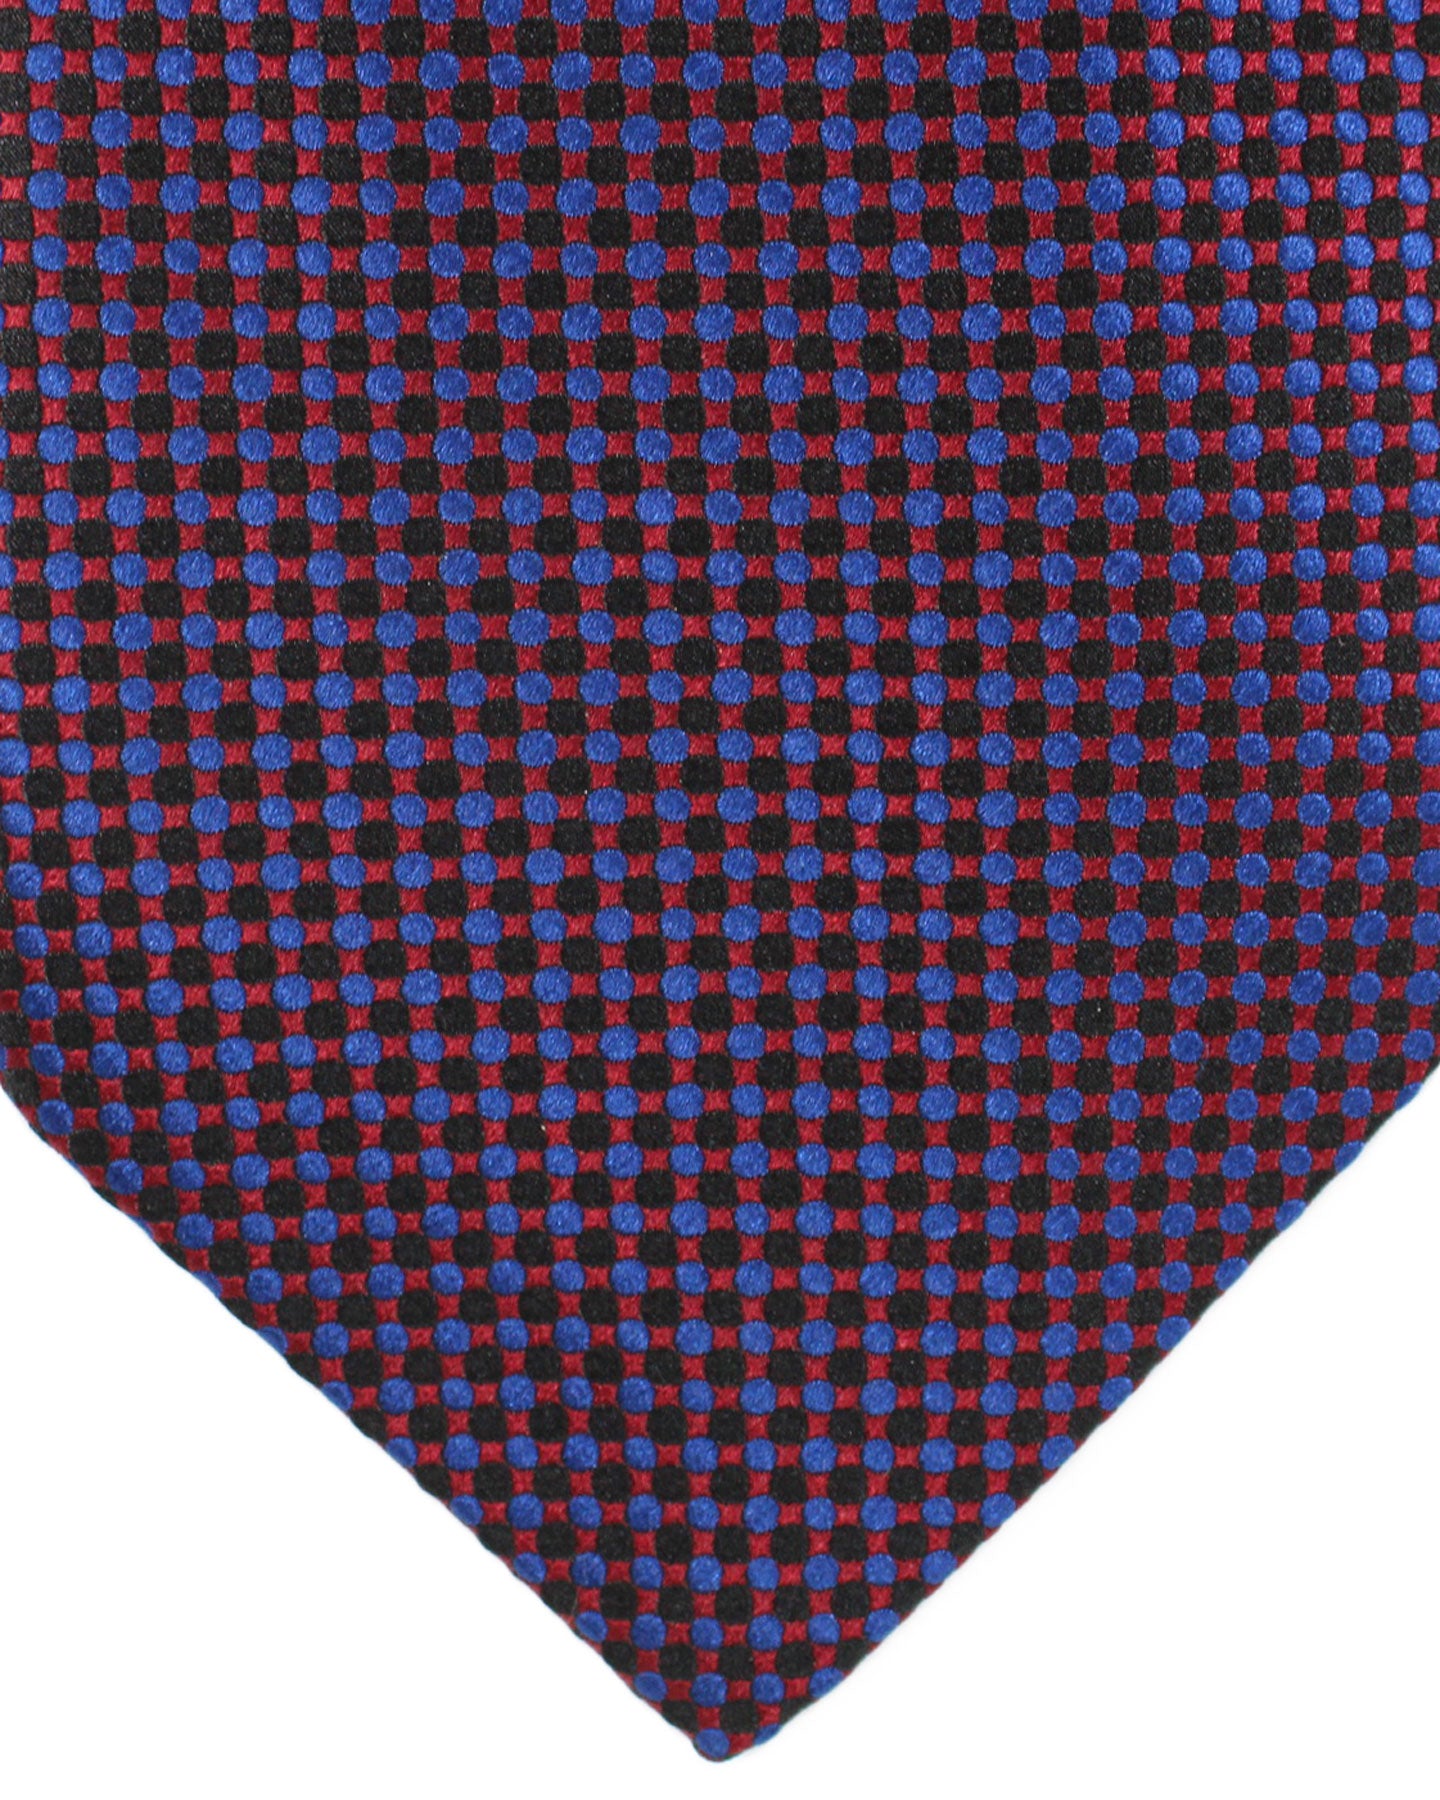 Zilli Extra Long Necktie Black Royal Blue Burgundy Geometric - Hand Made In Italy